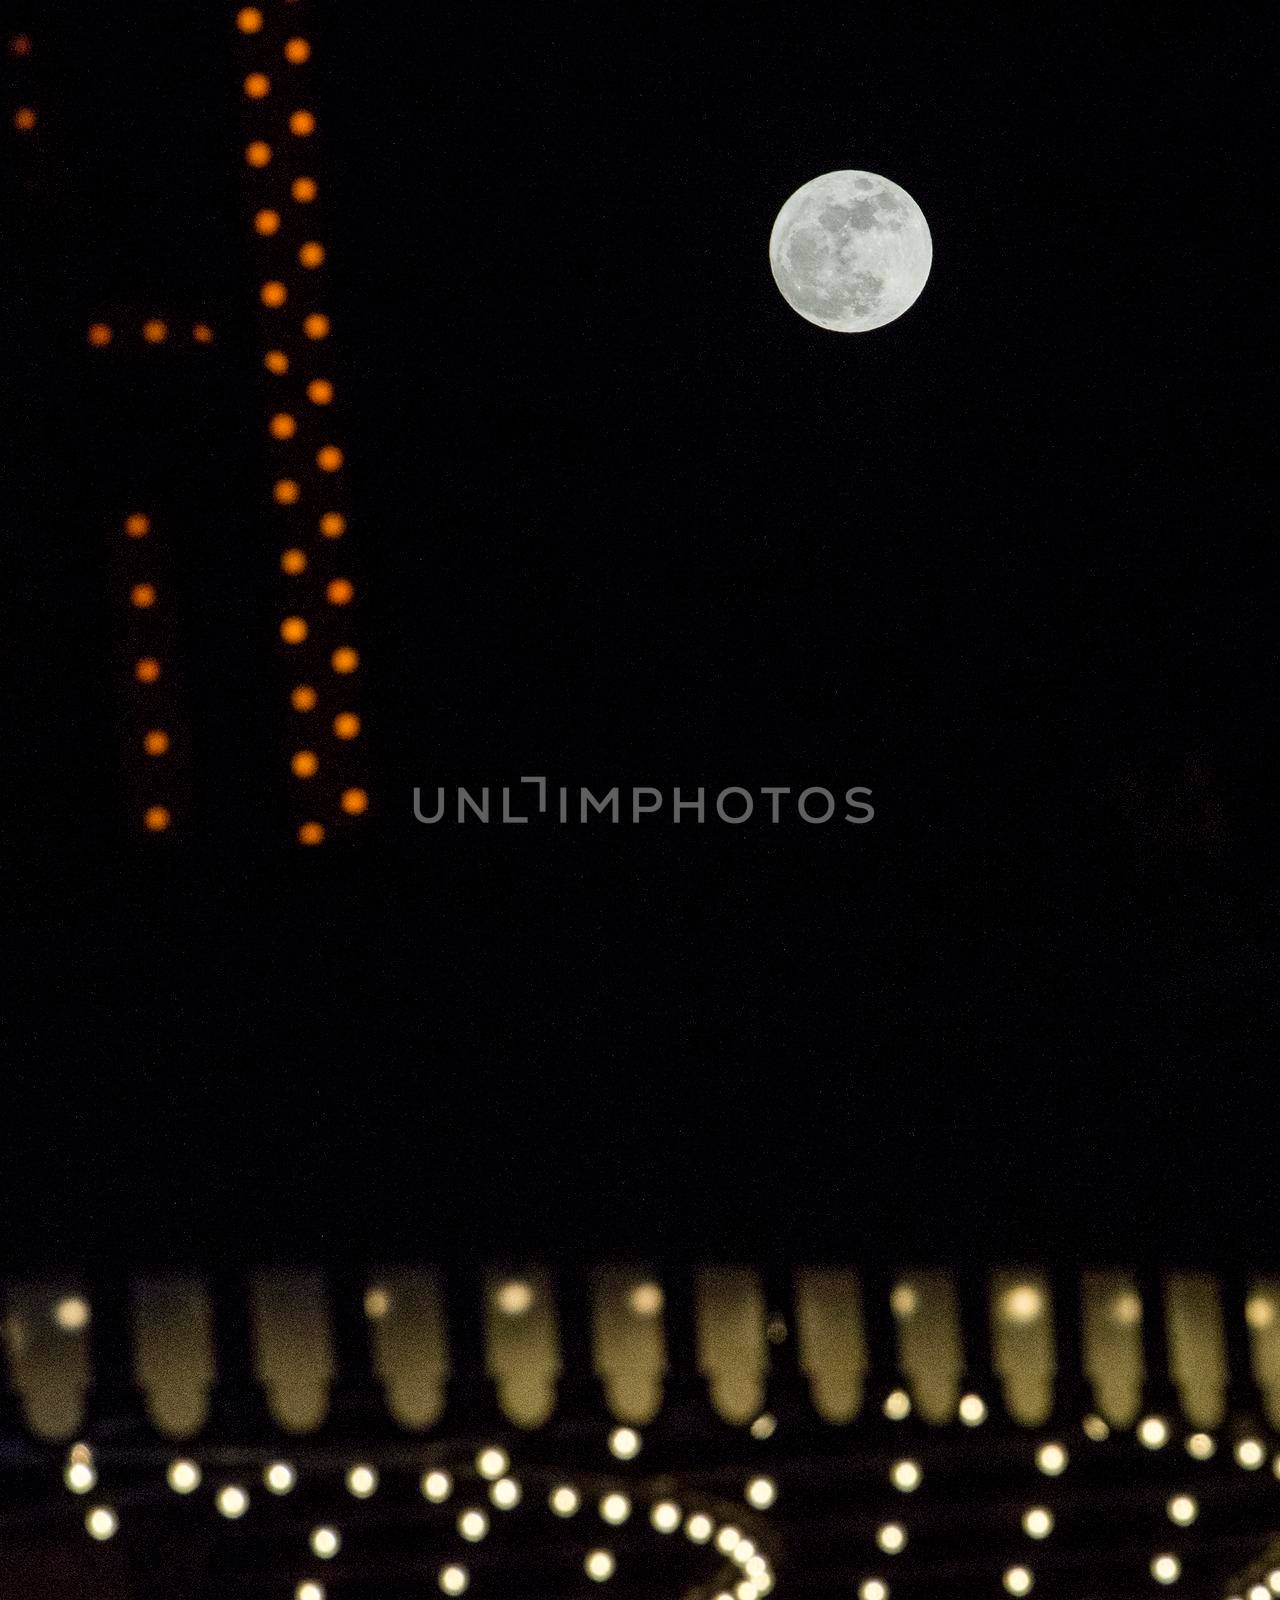 Full moon with face and party lights in the foreground. by jyurinko